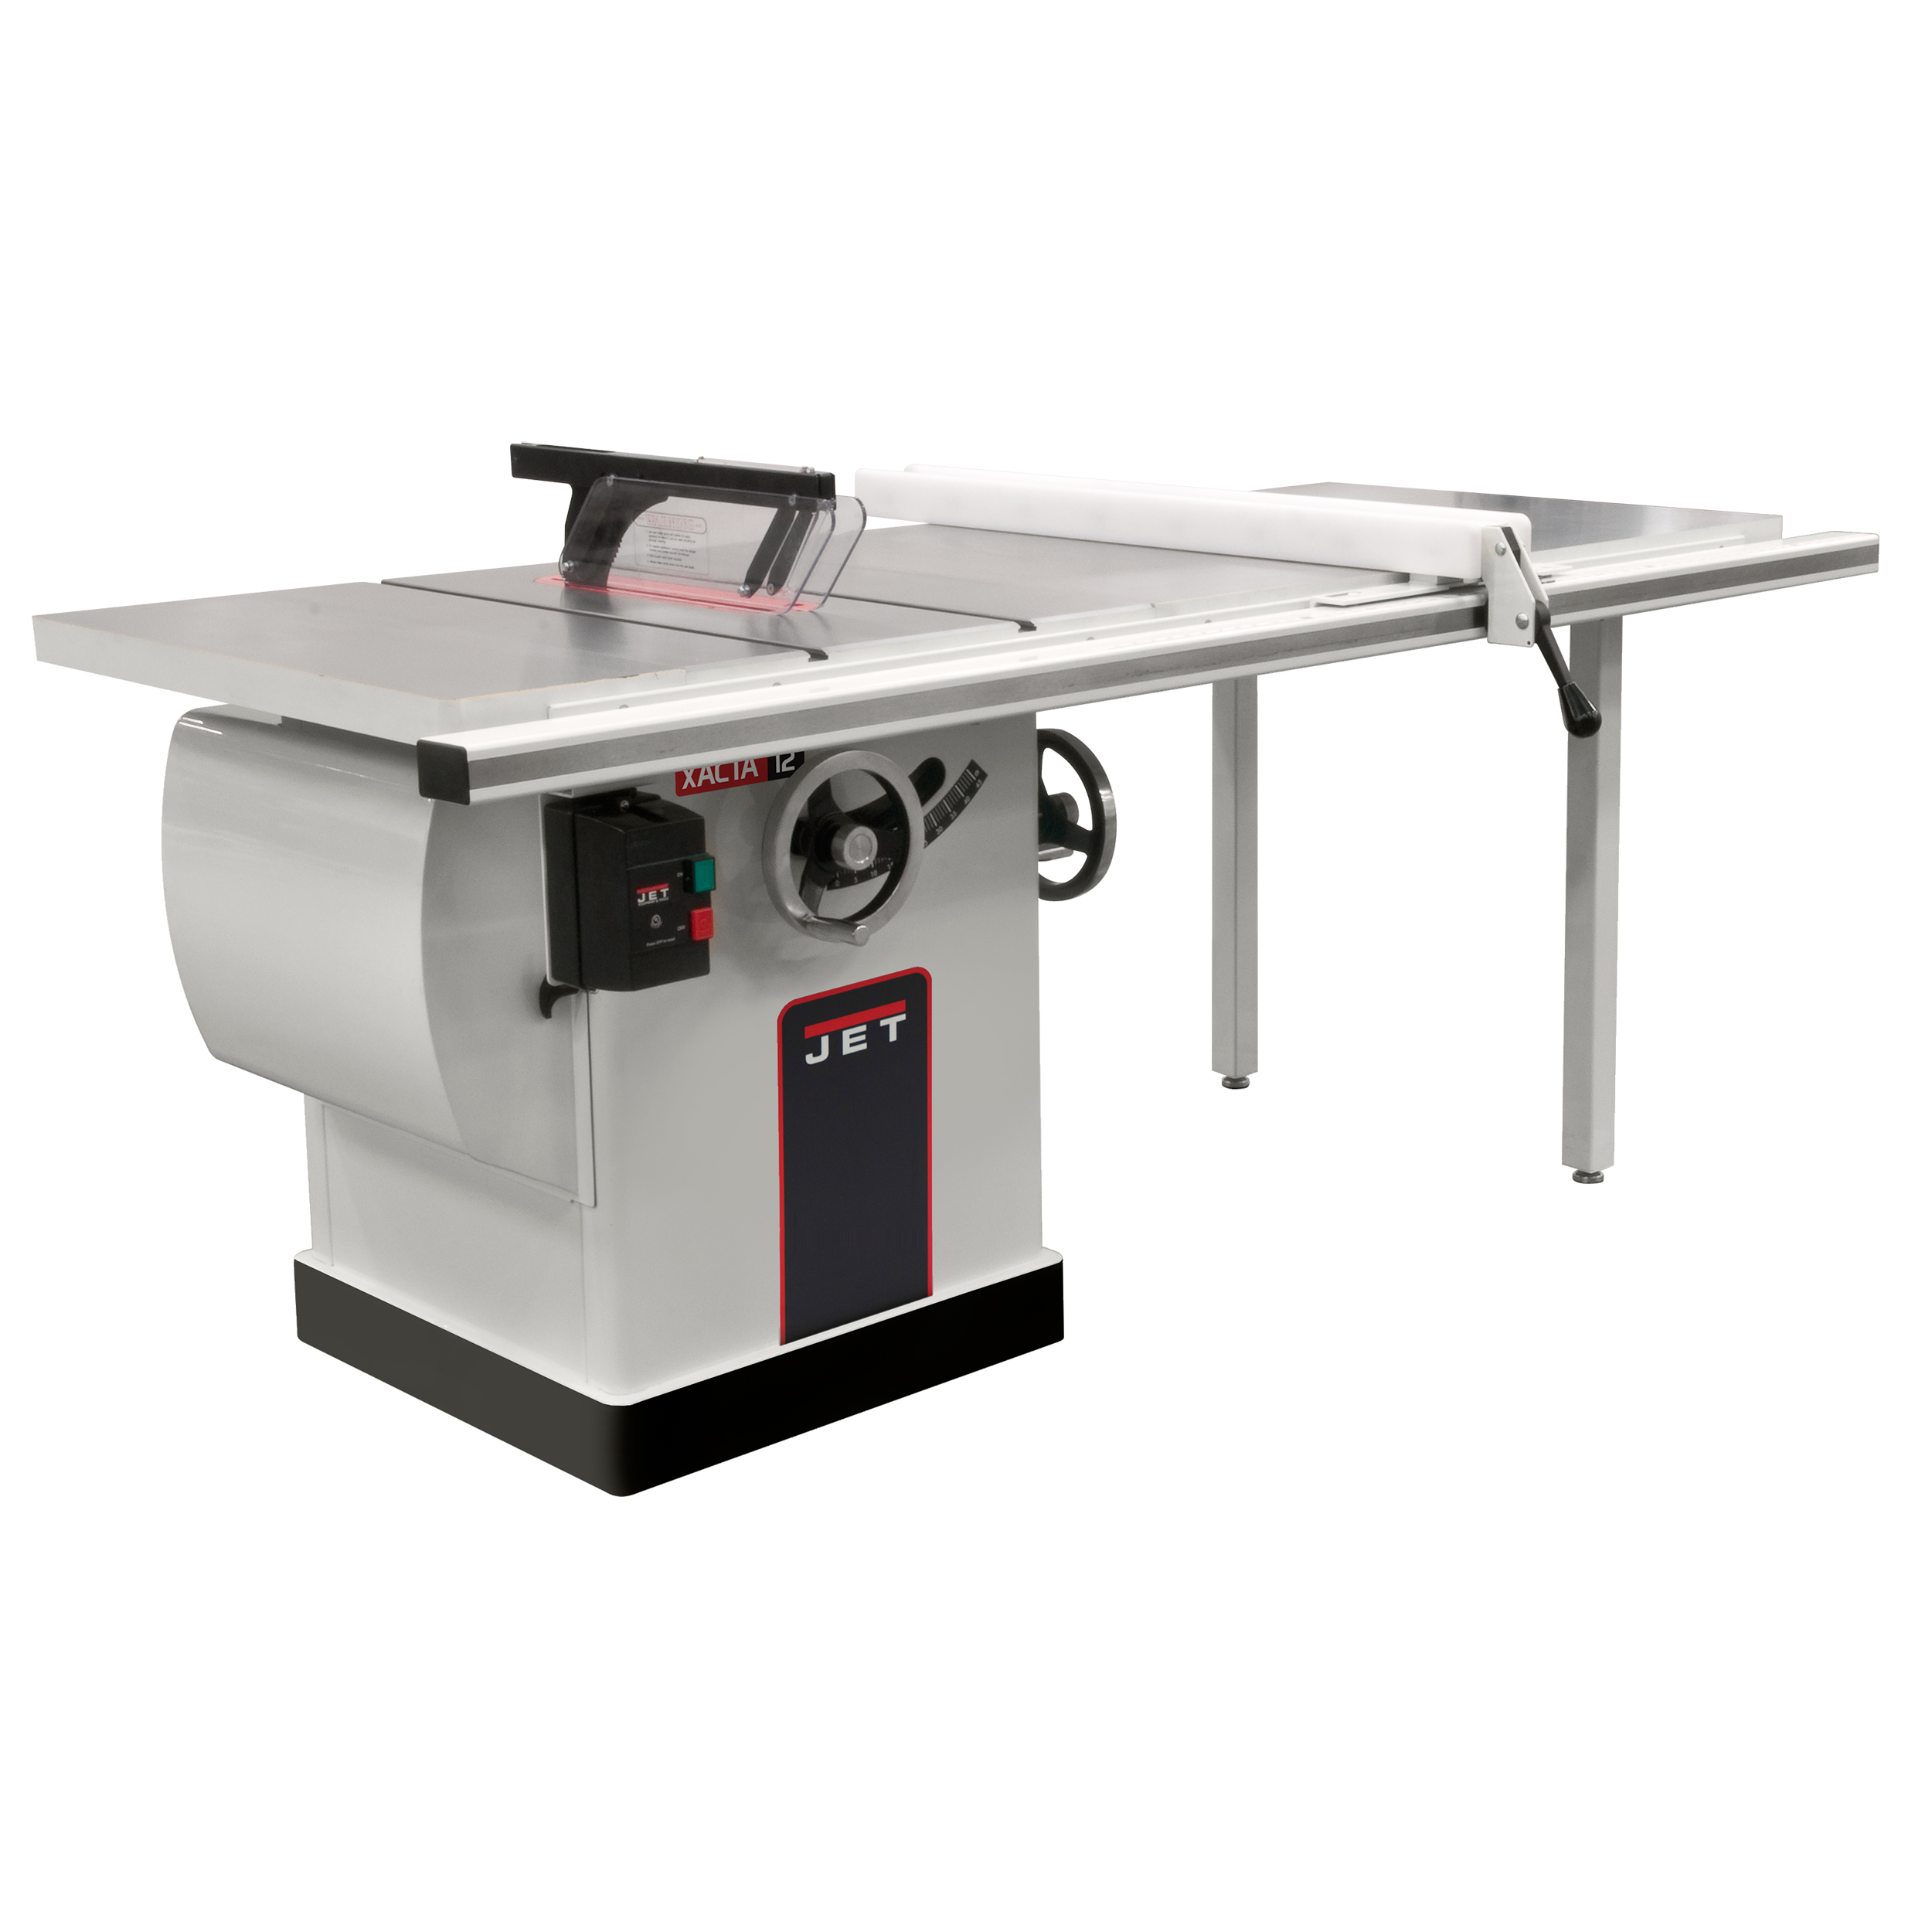 Xactasaw Deluxe Table Saw 5hp, 1 Ph, 50" Rip